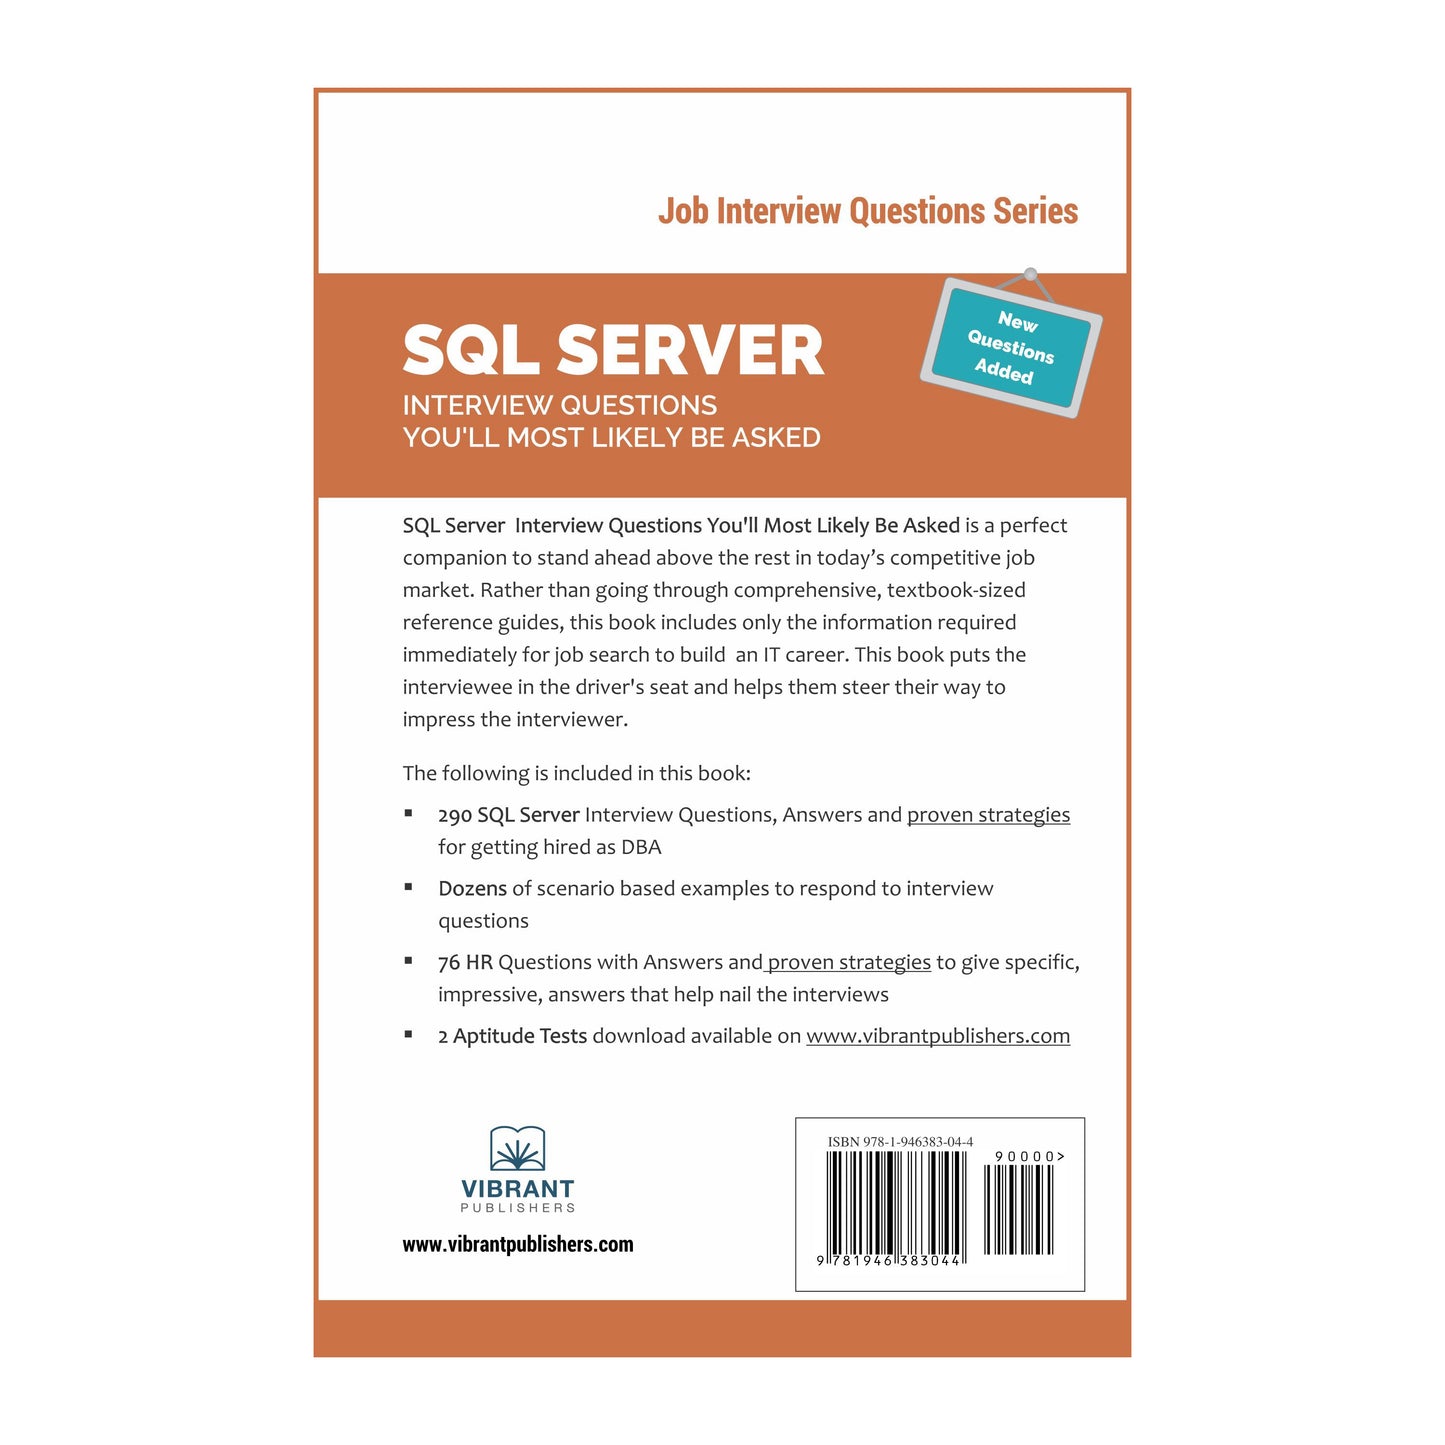 SQL Server Interview Questions You’ll Most Likely Be Asked